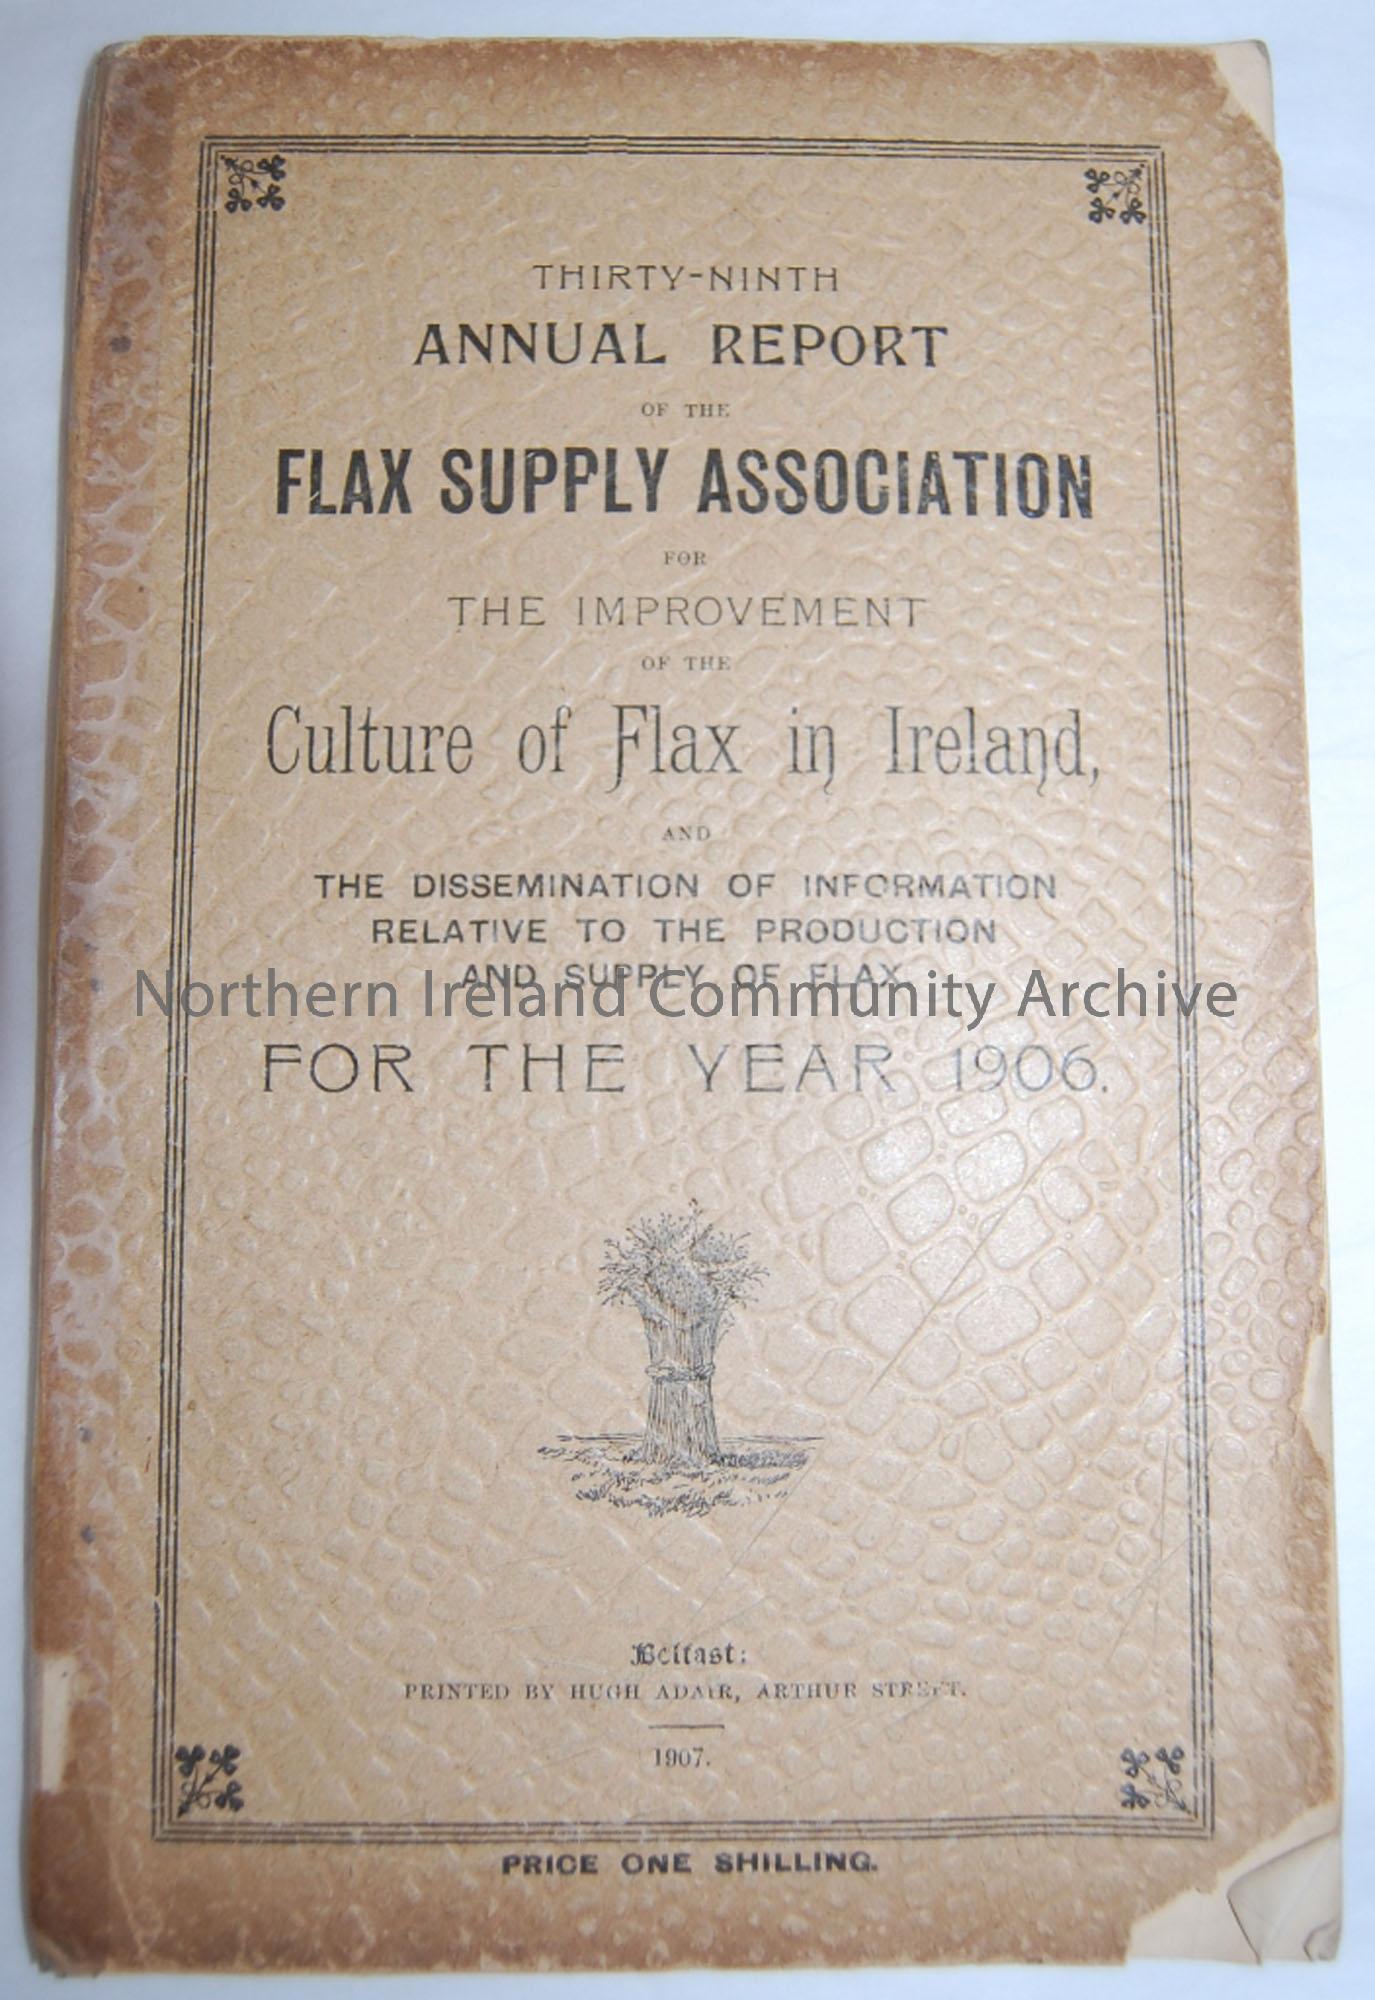 ’39th Annual Report of the Flax Supply Association for the Improvement of the Culture of Flax in Ireland…for the year 1906′ printed in Belfast by Hu…